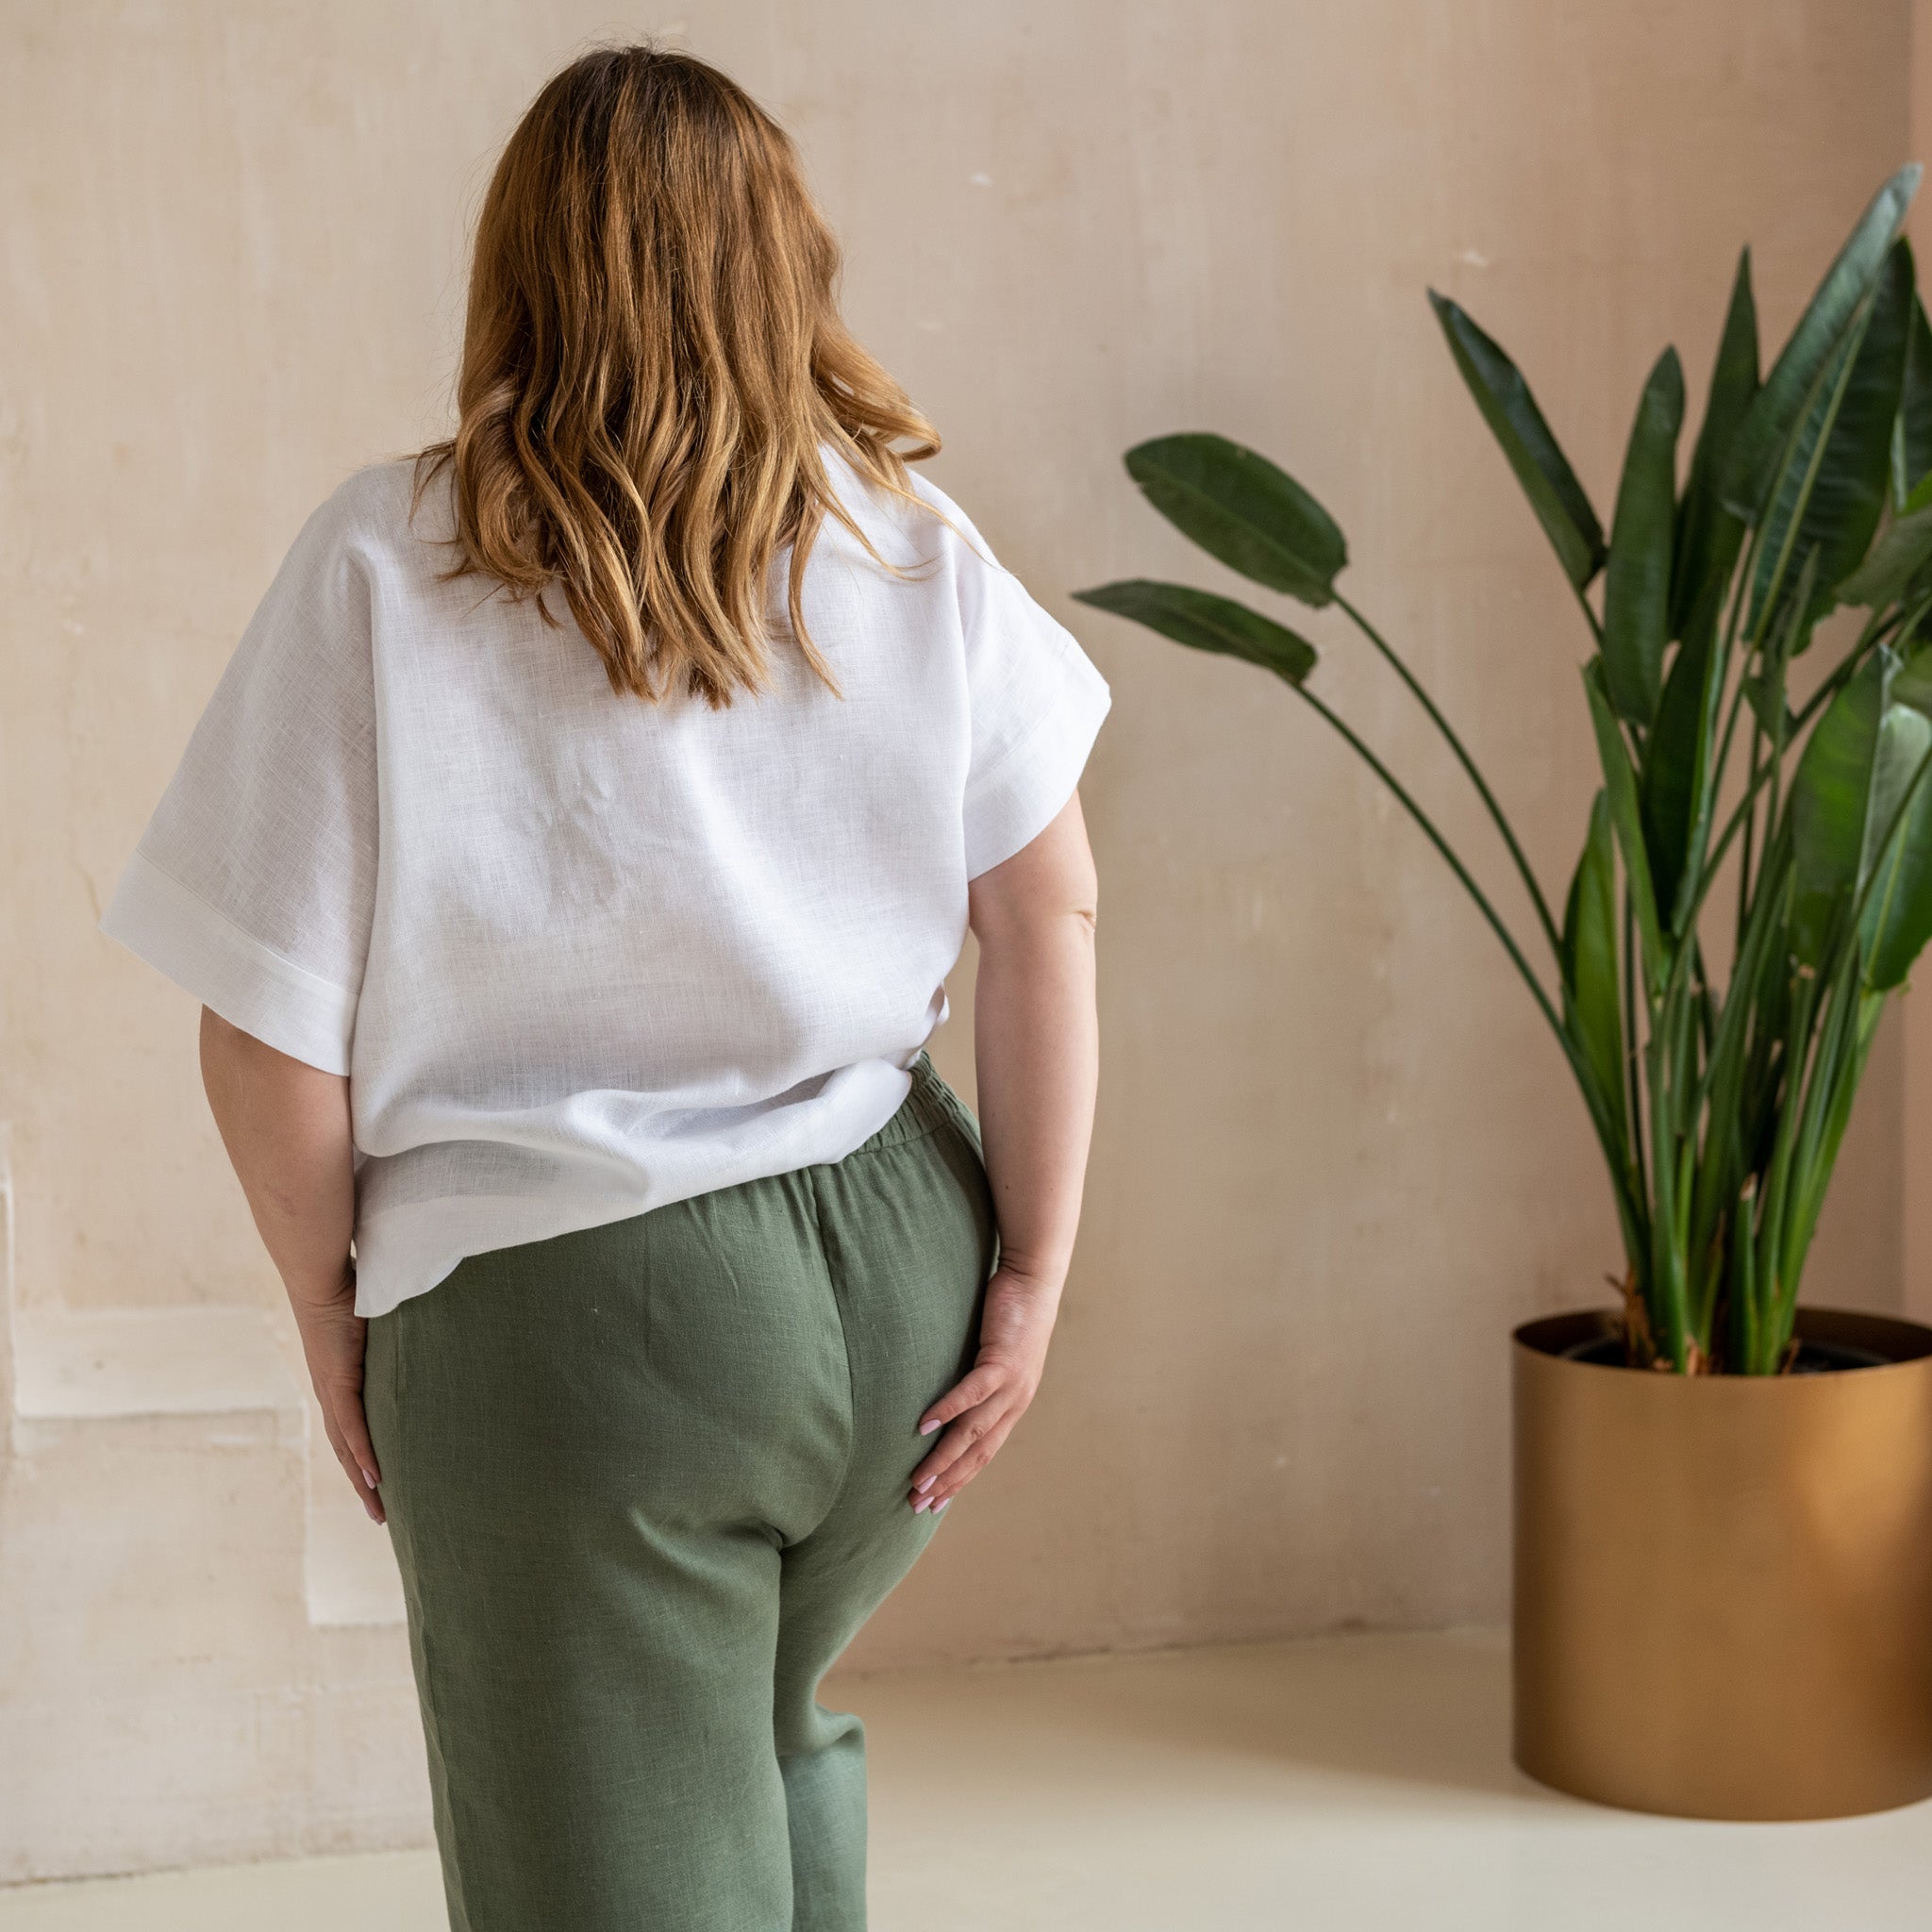 THE MOST FLATTERING PANTS FOR CURVY WOMEN – Petite Style Studio